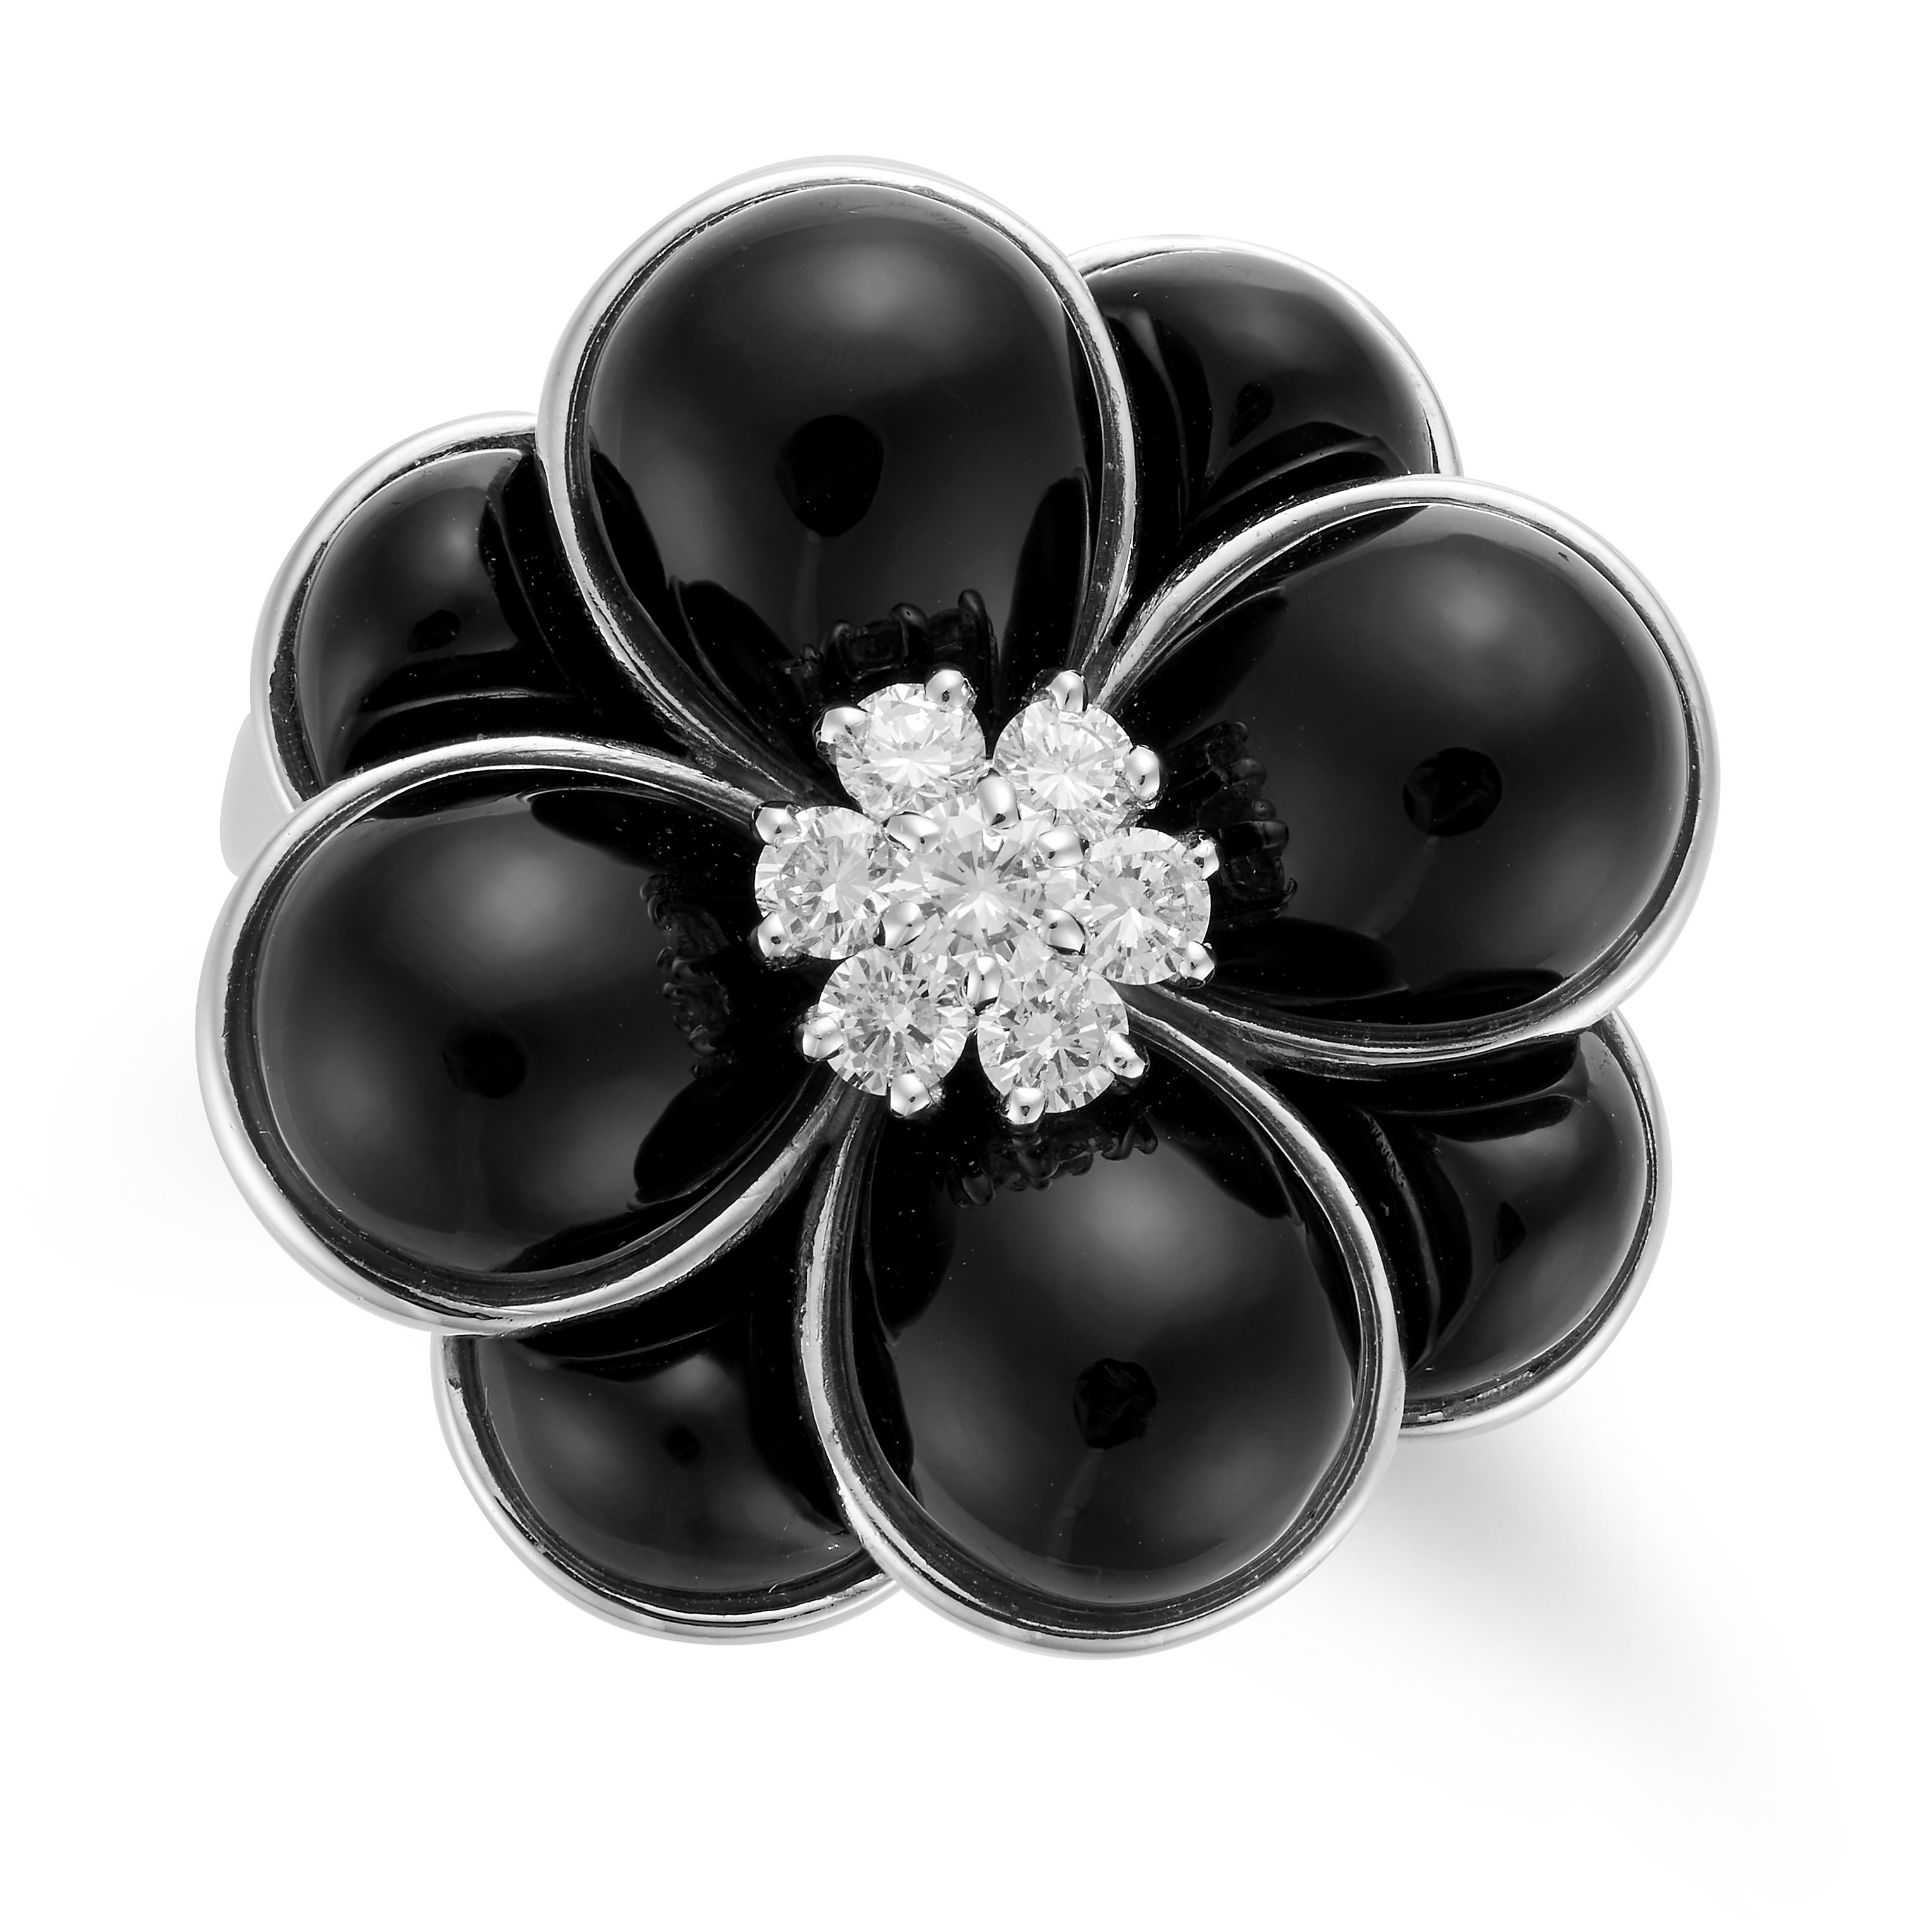 VAN CLEEF & ARPELS, A DIAMOND AND ENAMEL FLOWER RING designed as a flower set with polished onyx ...